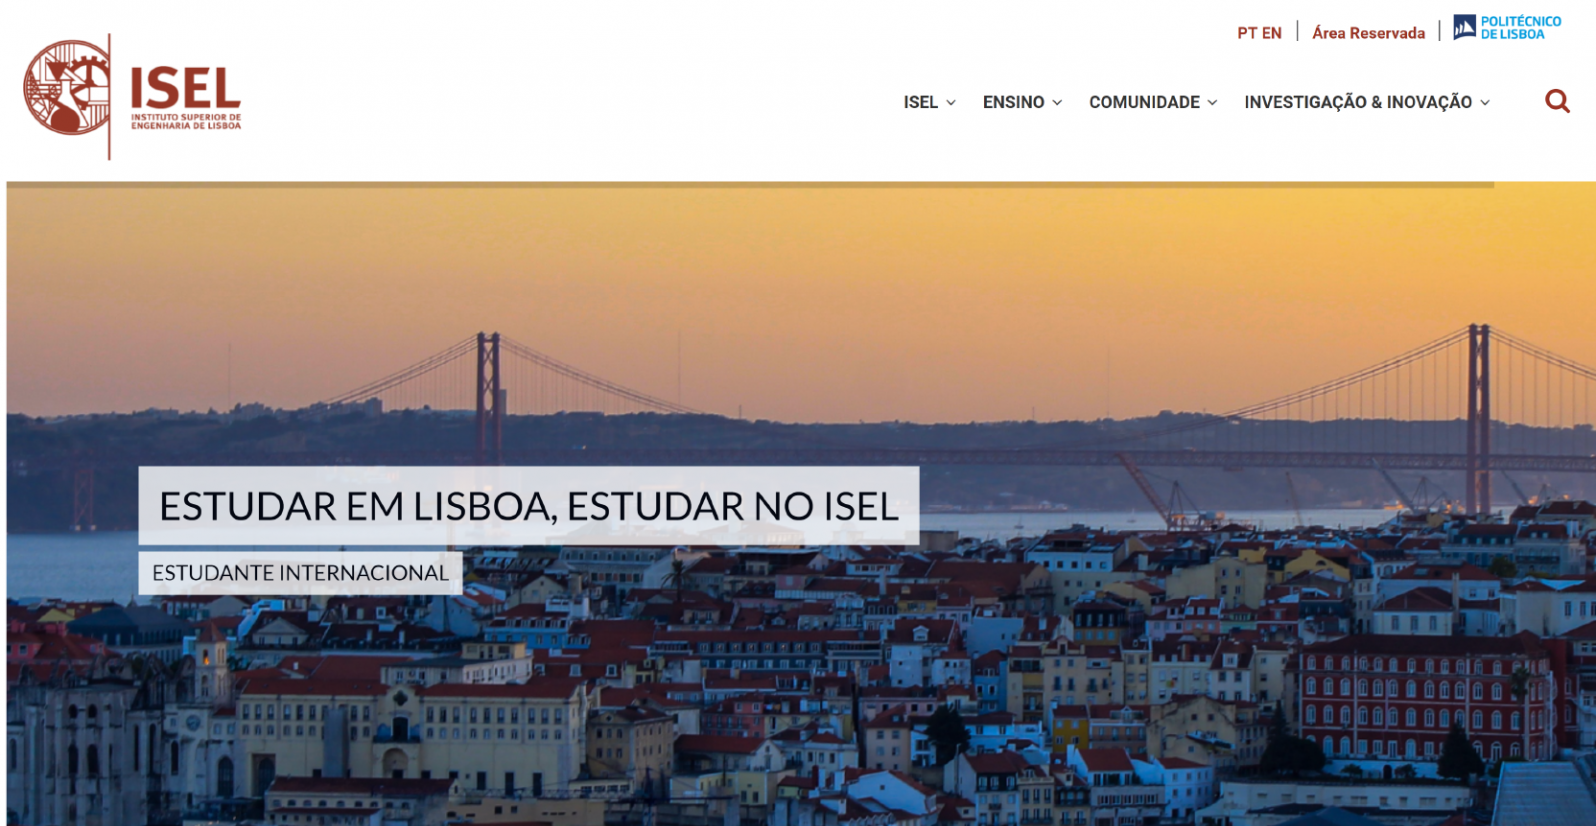 site do isel